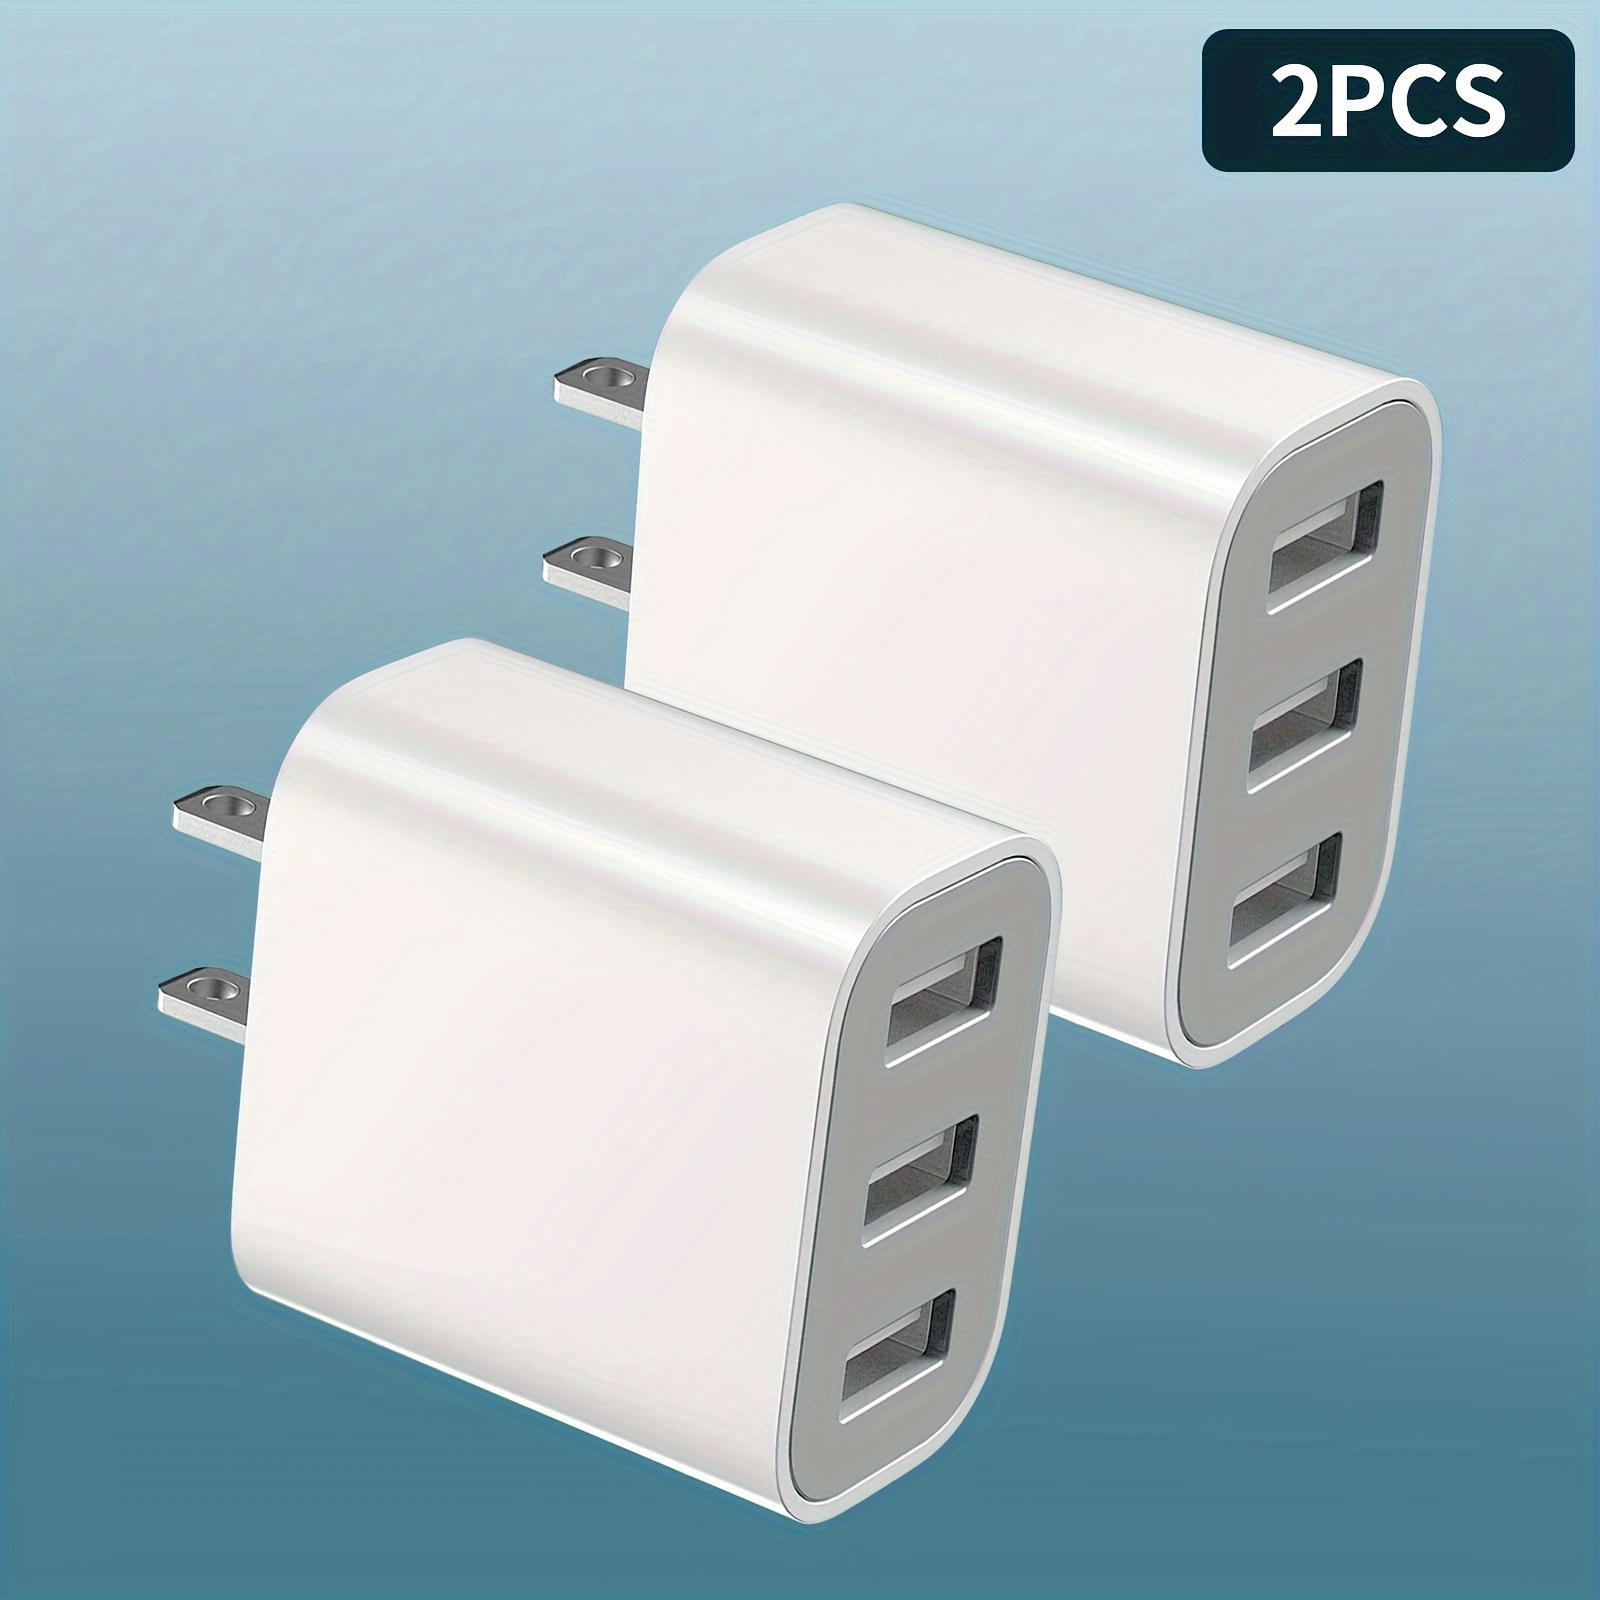 

2pcs Usb Wall Charger, 3-port Fast Charging Adapter, 1.65x1.1x2.32in Compact Size, Compatible With Iphone 14/13/12/11 Pro Max/xs/x/se/8 Plus, Samsung Galaxy S22/s21/s20, Quick Charge Travel Plug Brick